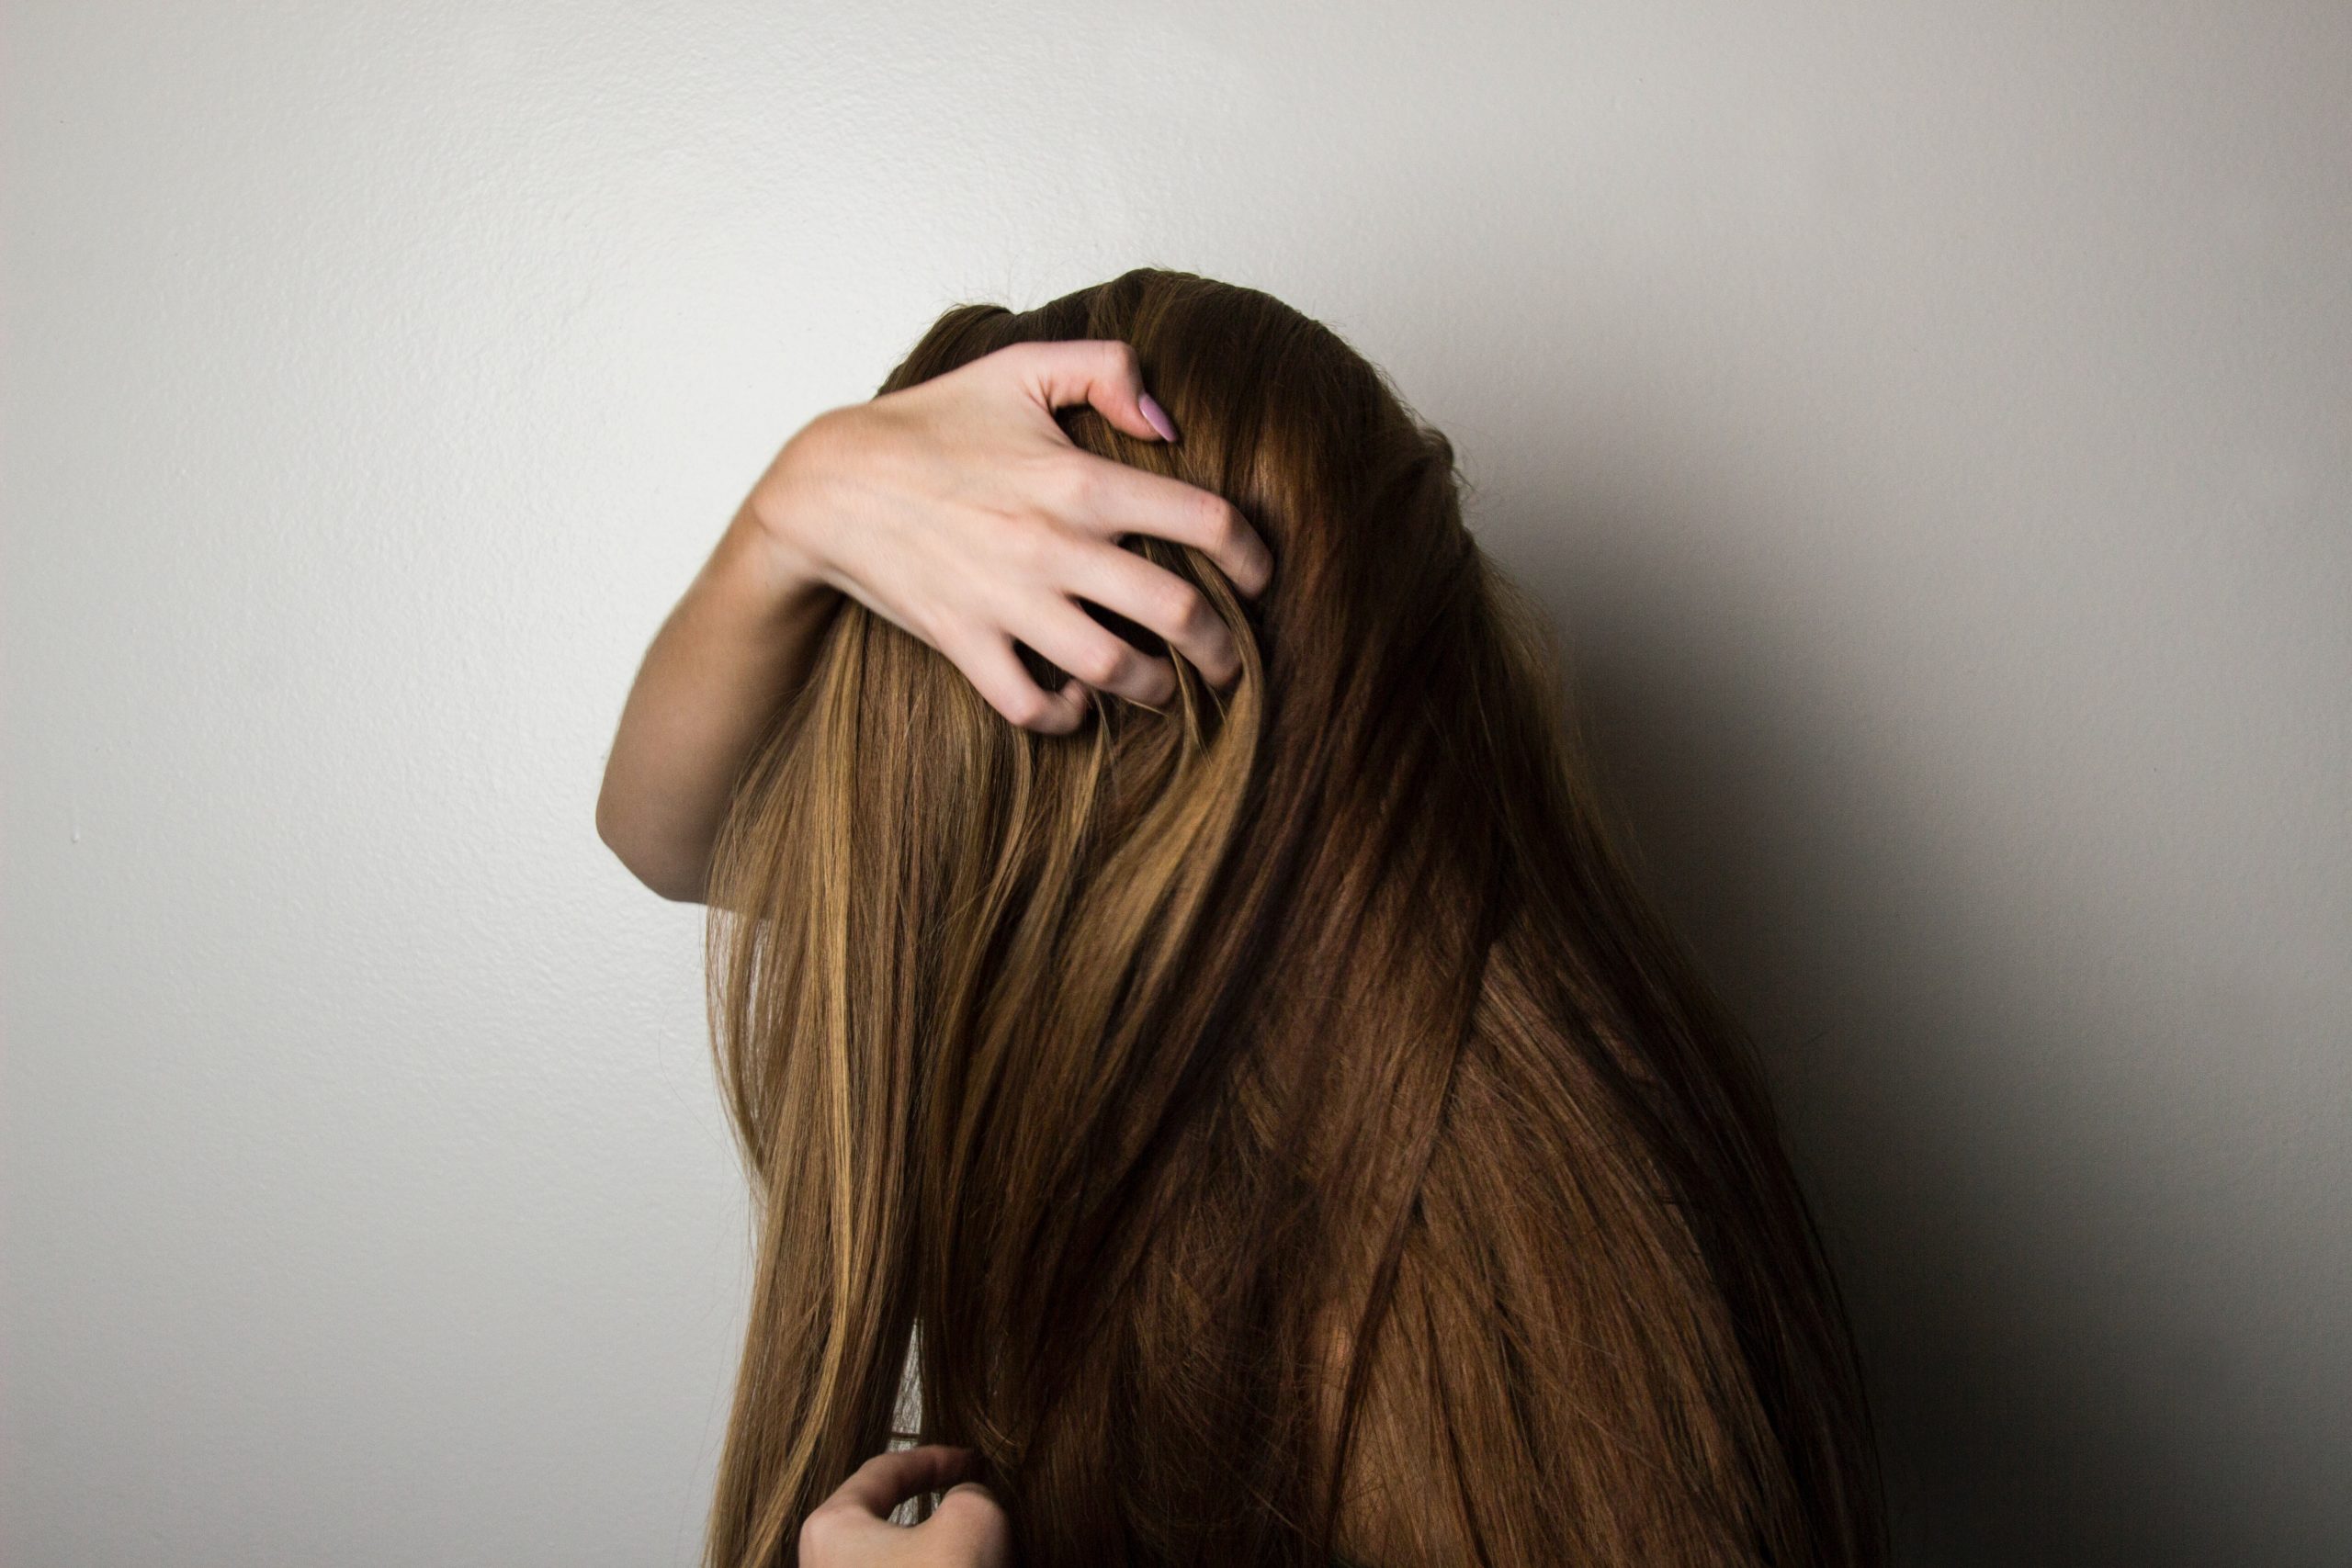 A woman hides her face with her hair.